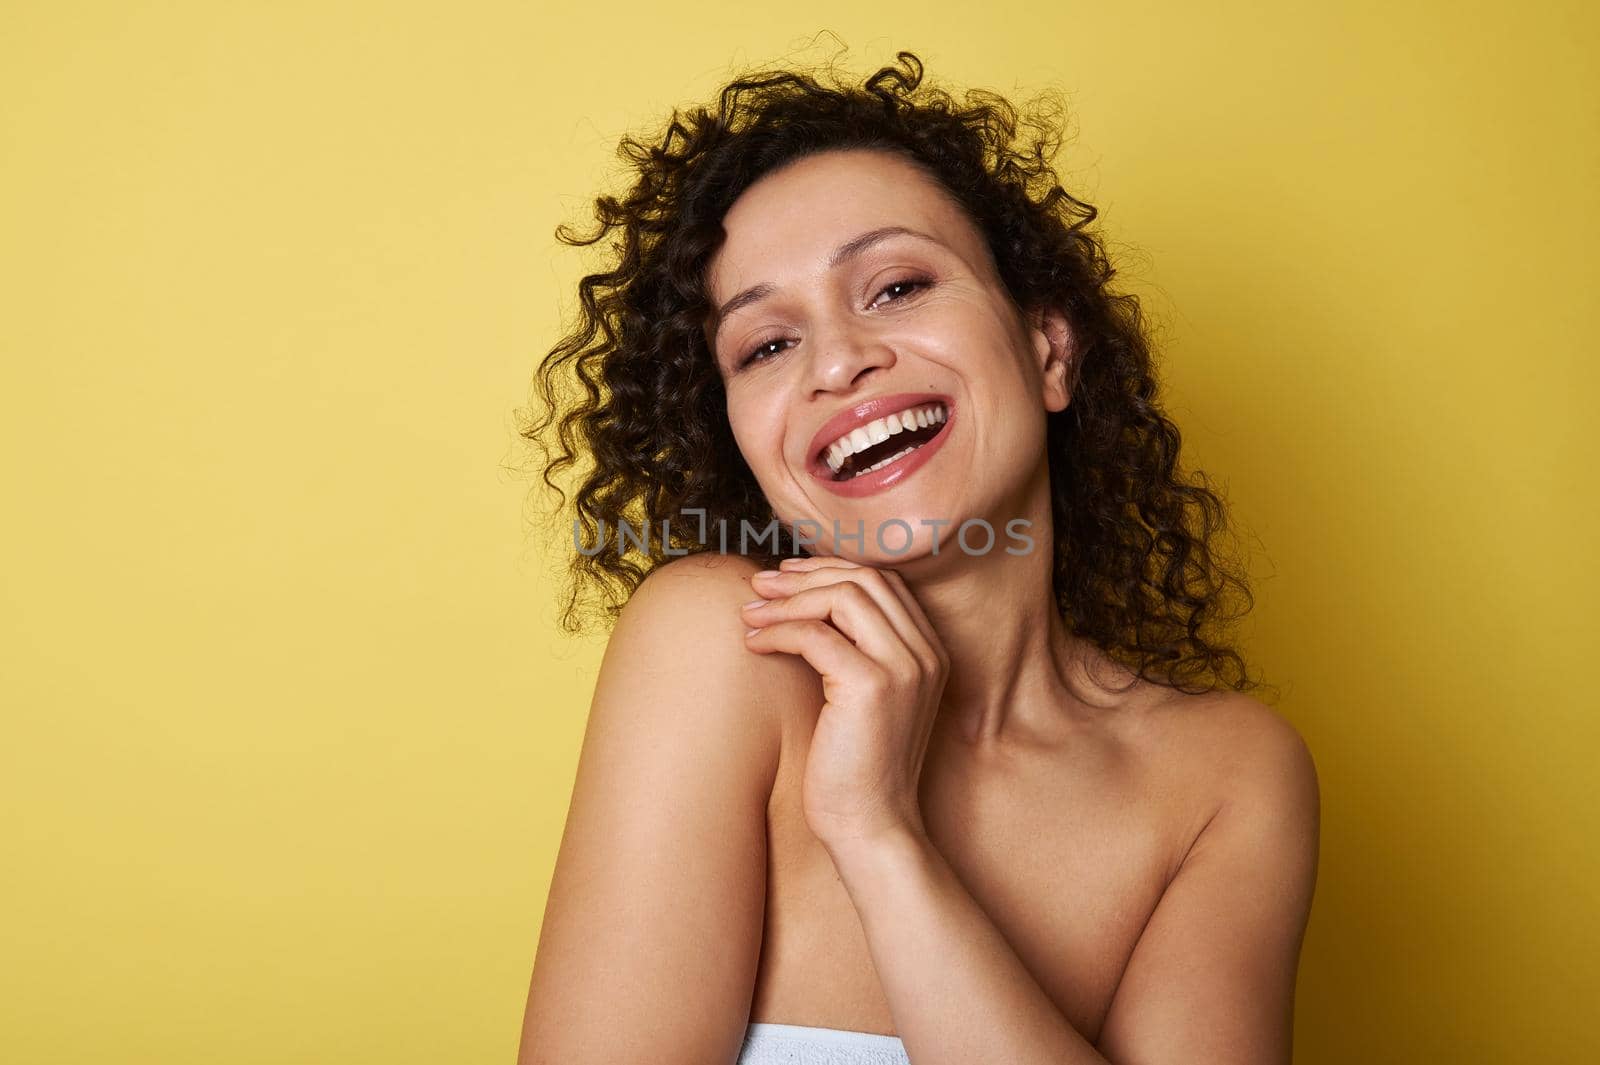 Beauty portrait of young half naked woman with curly hair smiling toothy smile looking at camera, posing over yellow background with copy space by artgf